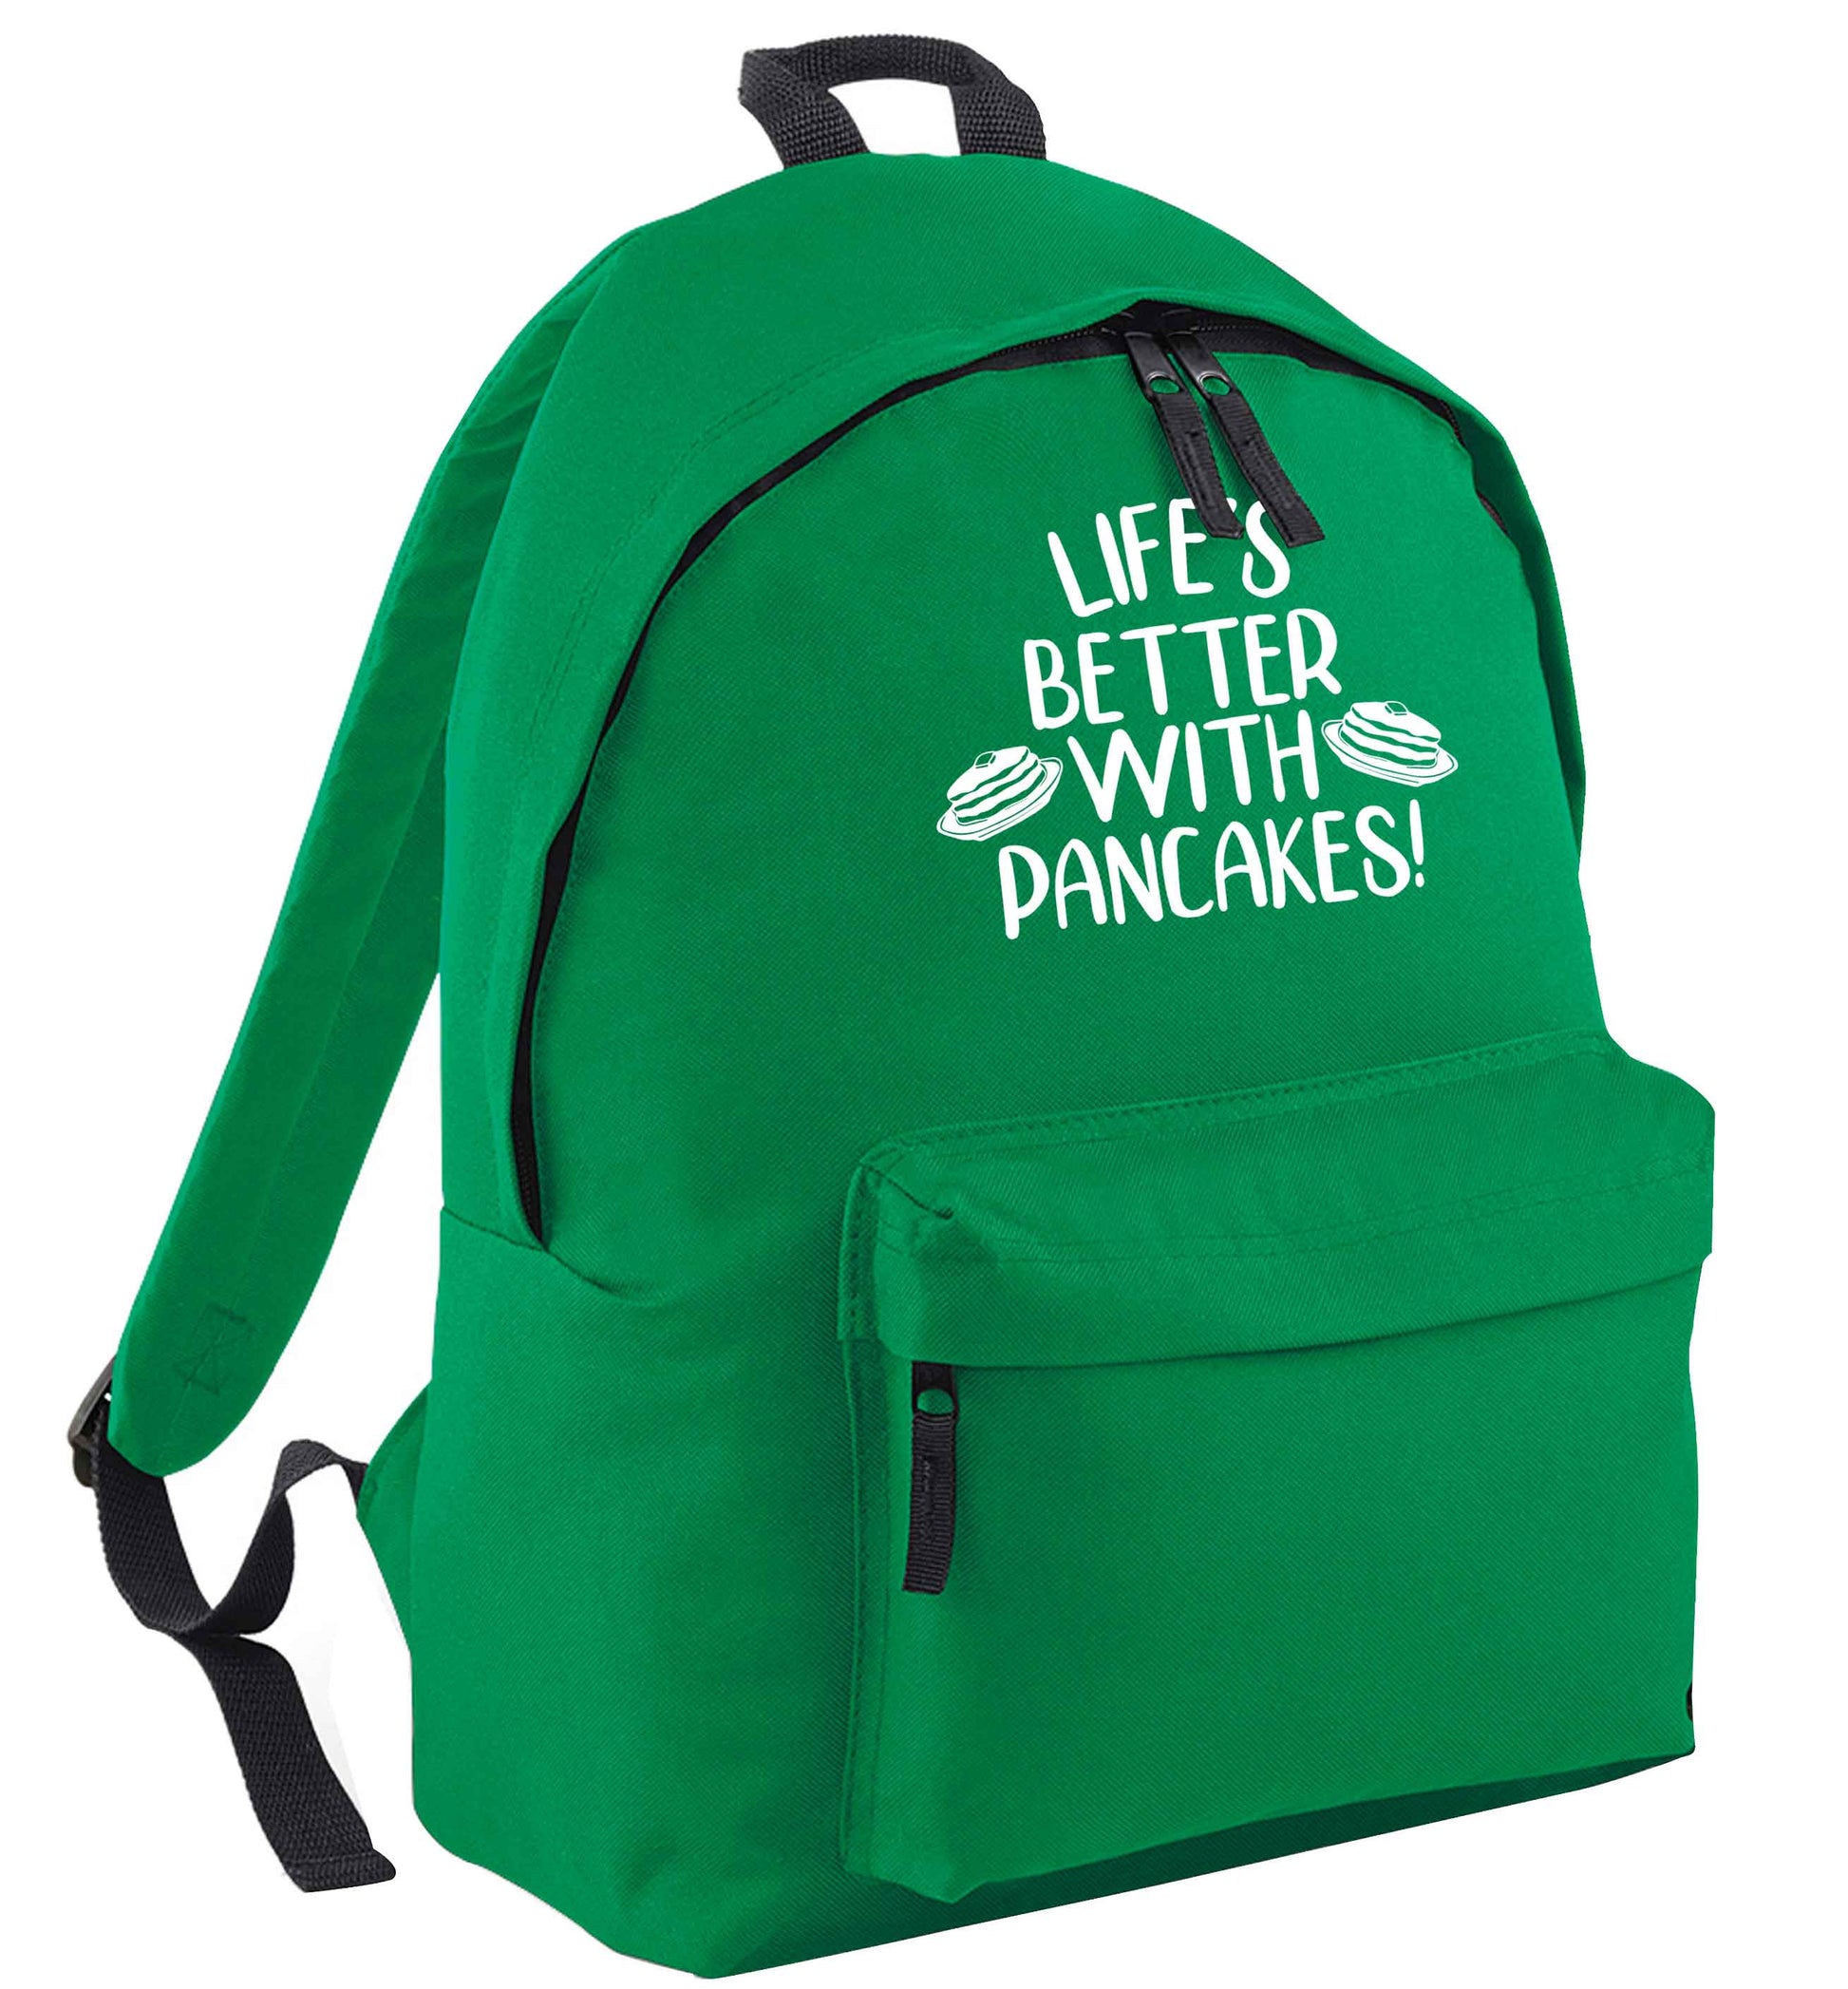 Life's better with pancakes green adults backpack